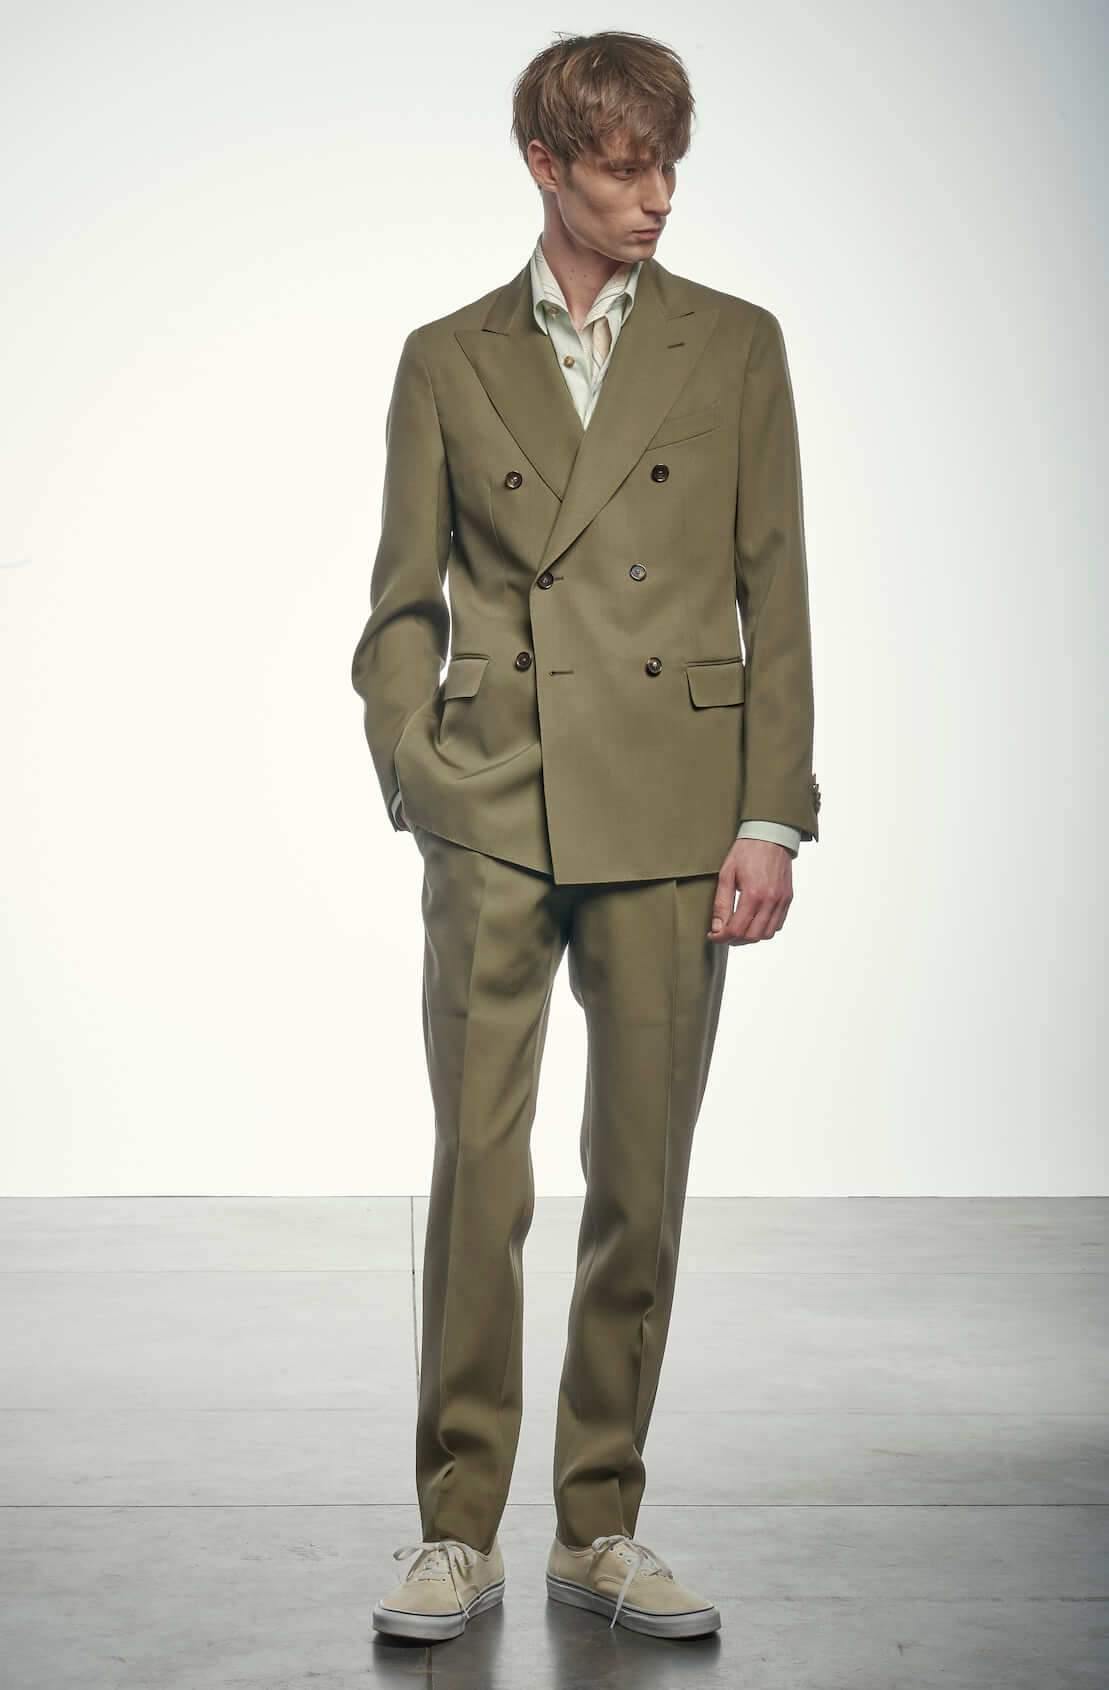 CARUSO Macbeth Double-Breasted Cotton Blend Suit in Khaki | CLOSET ...